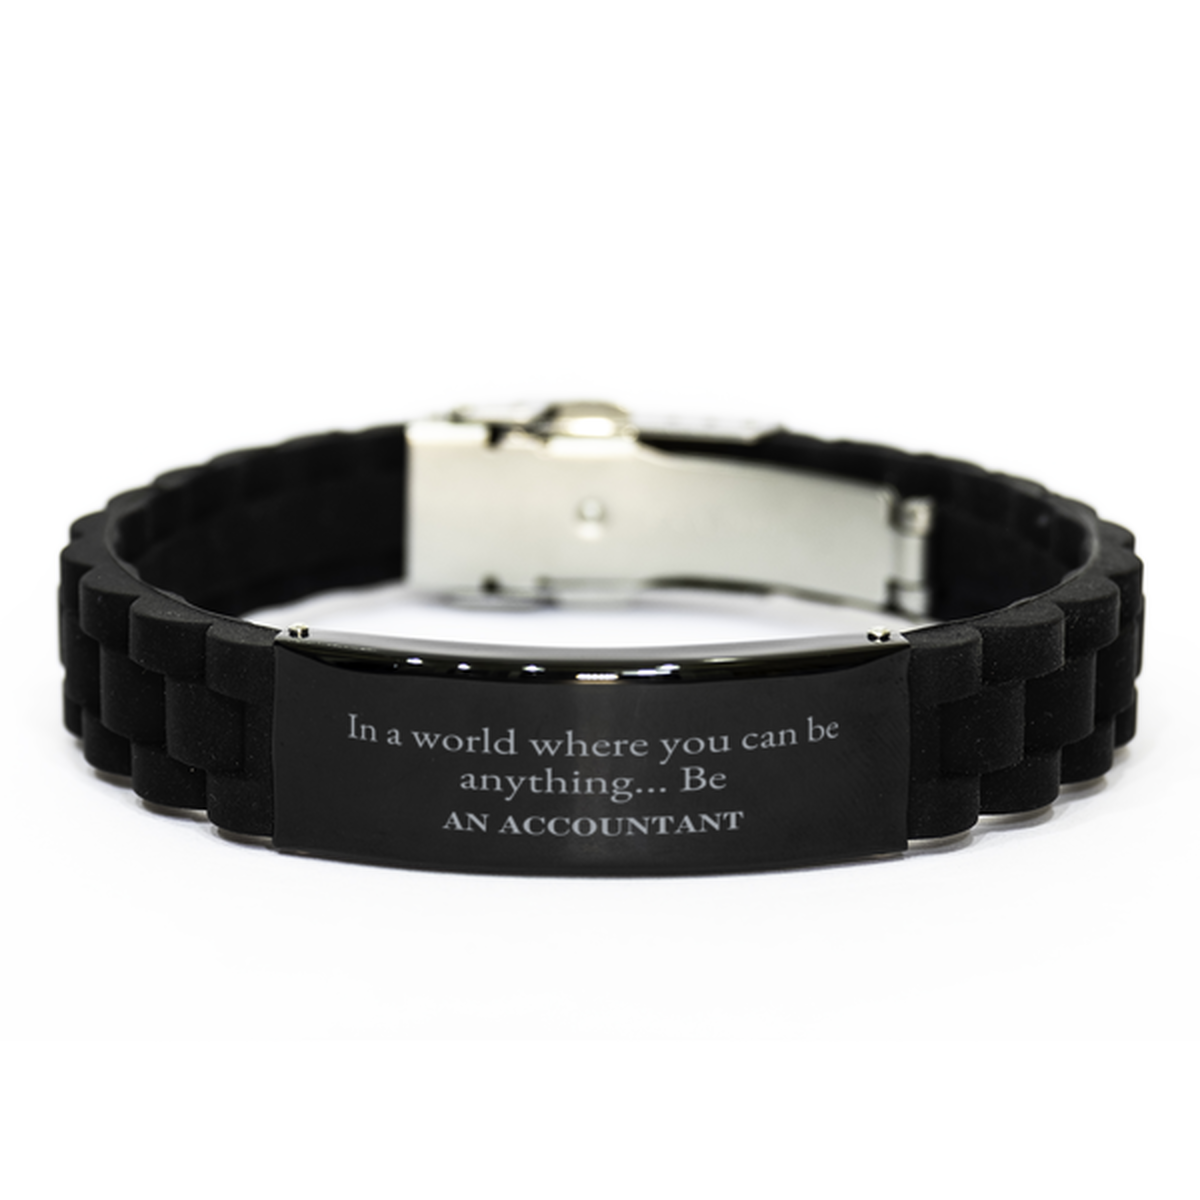 Gifts for Accountant, In a world where you can be anything, Appreciation Birthday Black Glidelock Clasp Bracelet for Men, Women, Friends, Coworkers